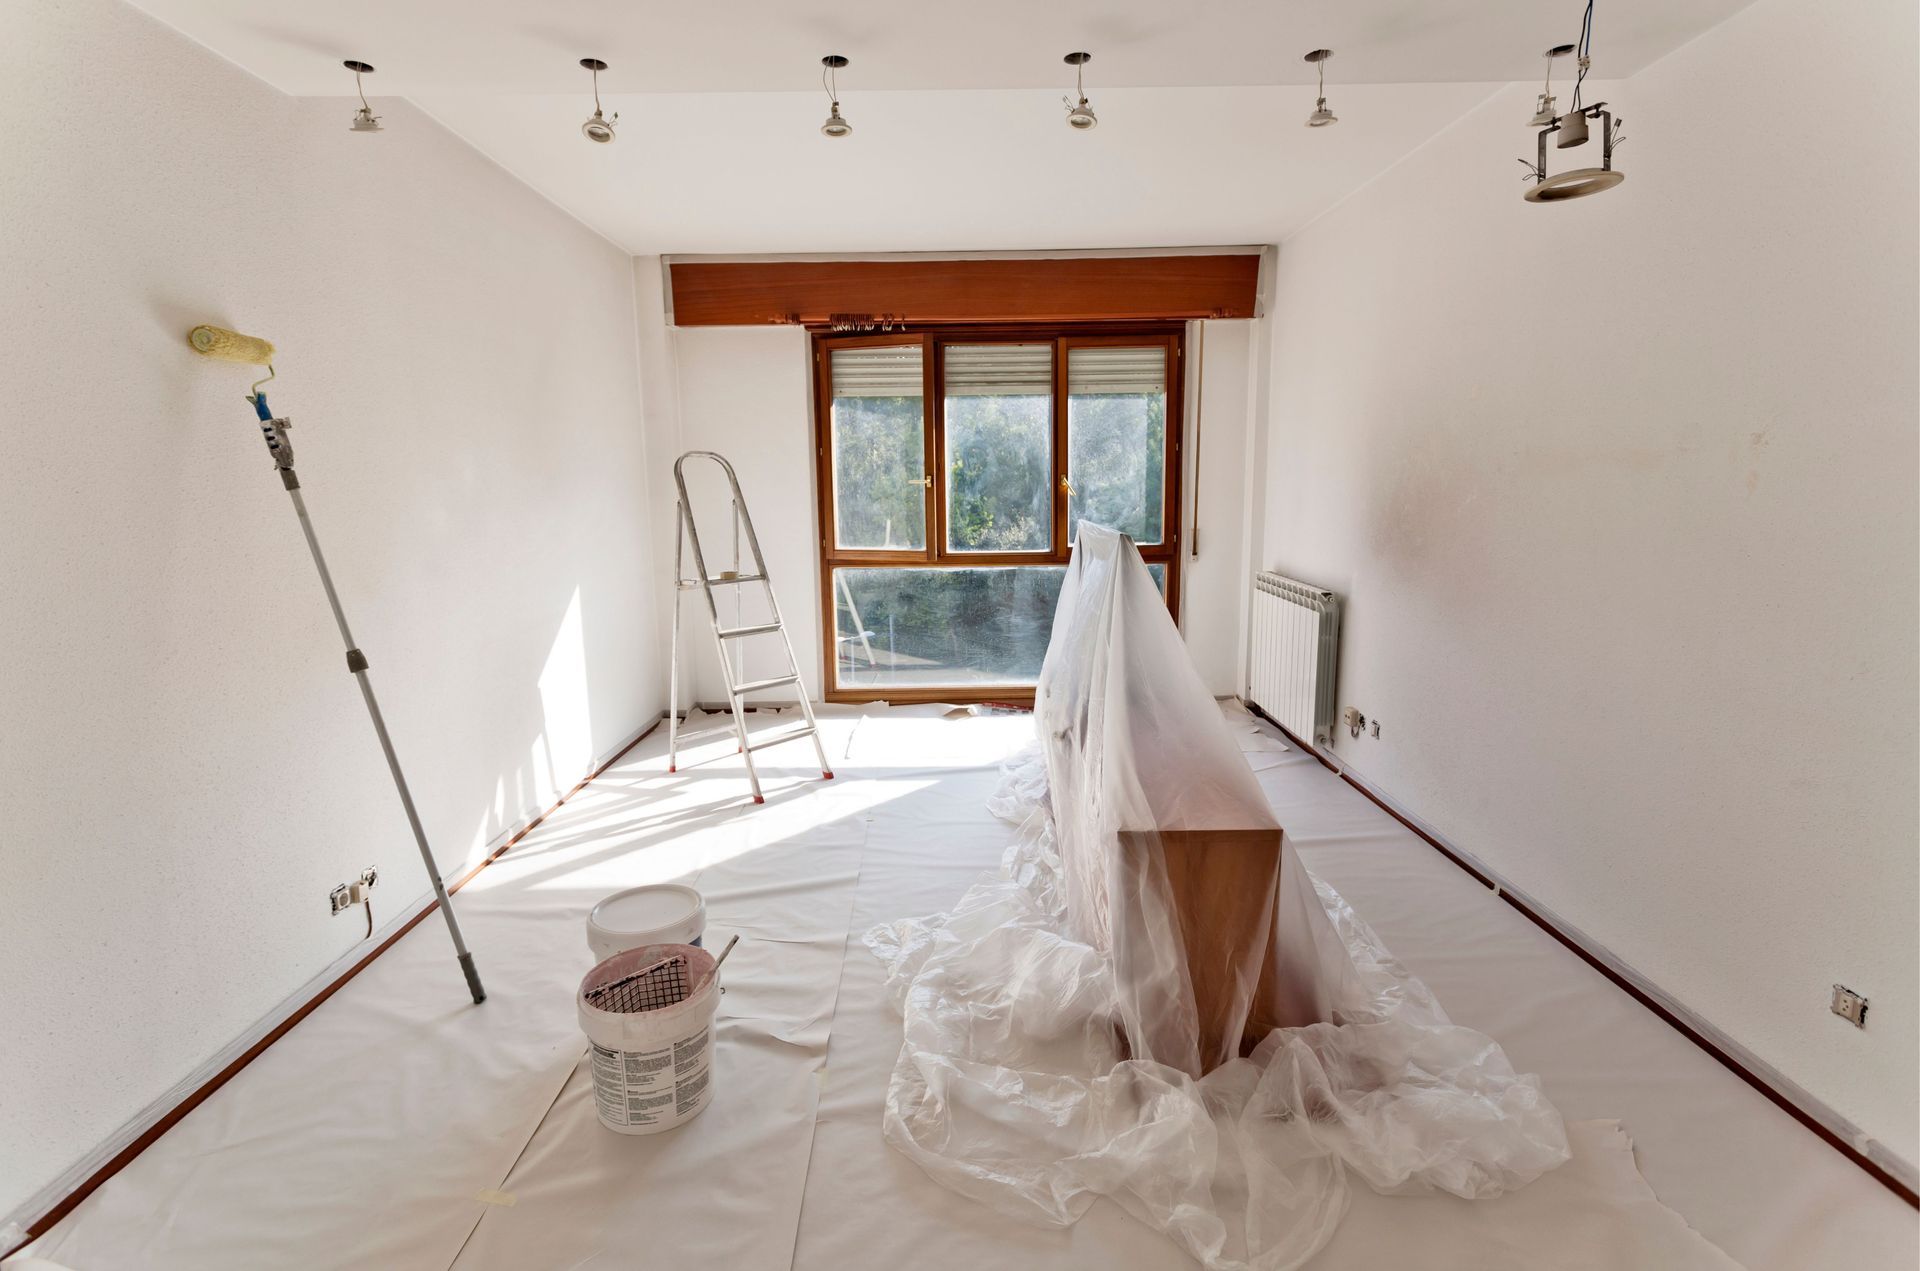 An empty room with a ladder , buckets of paint , and a painting roller.